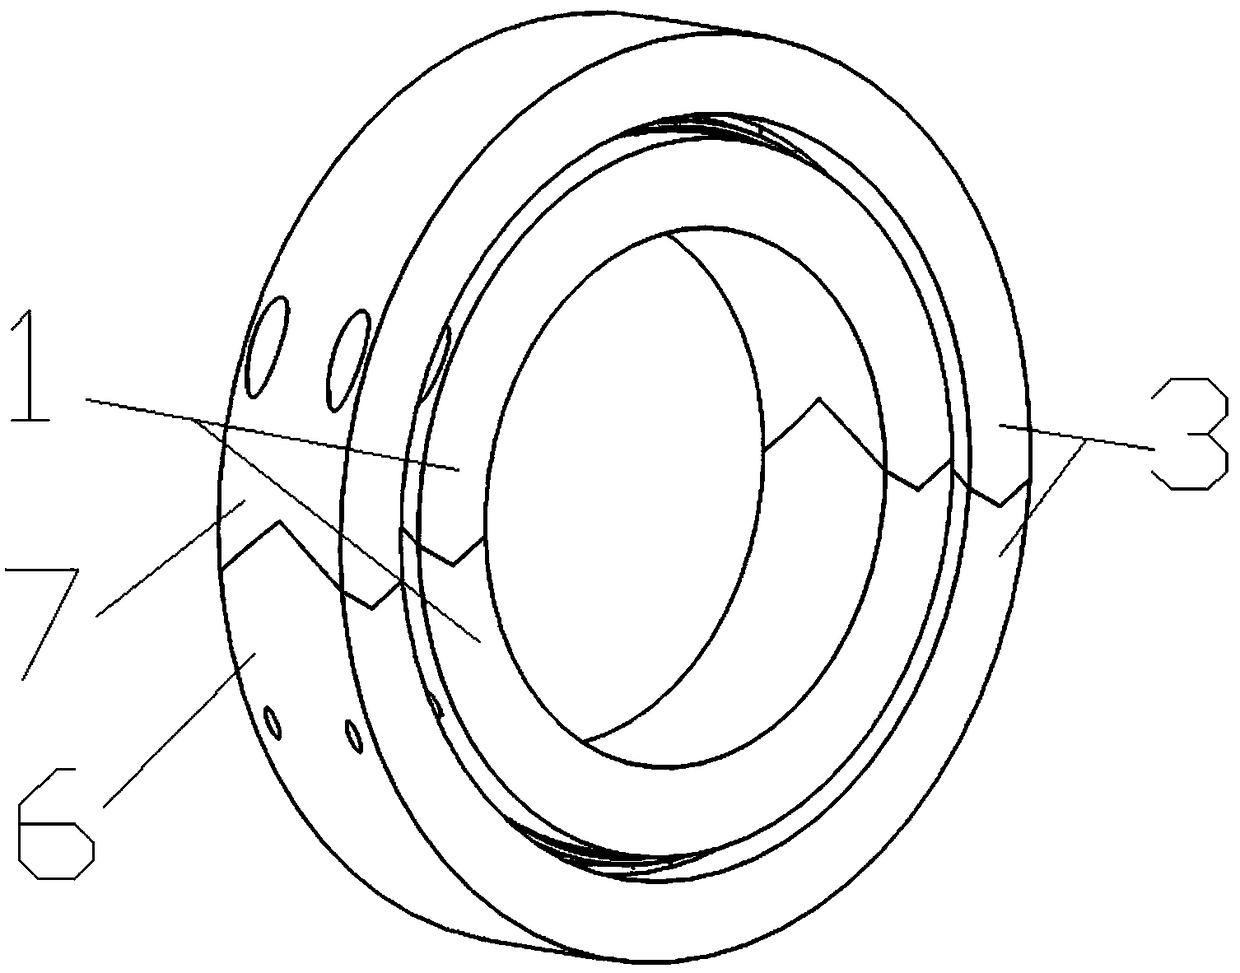 Semi-ring coupled precision rolling bearing